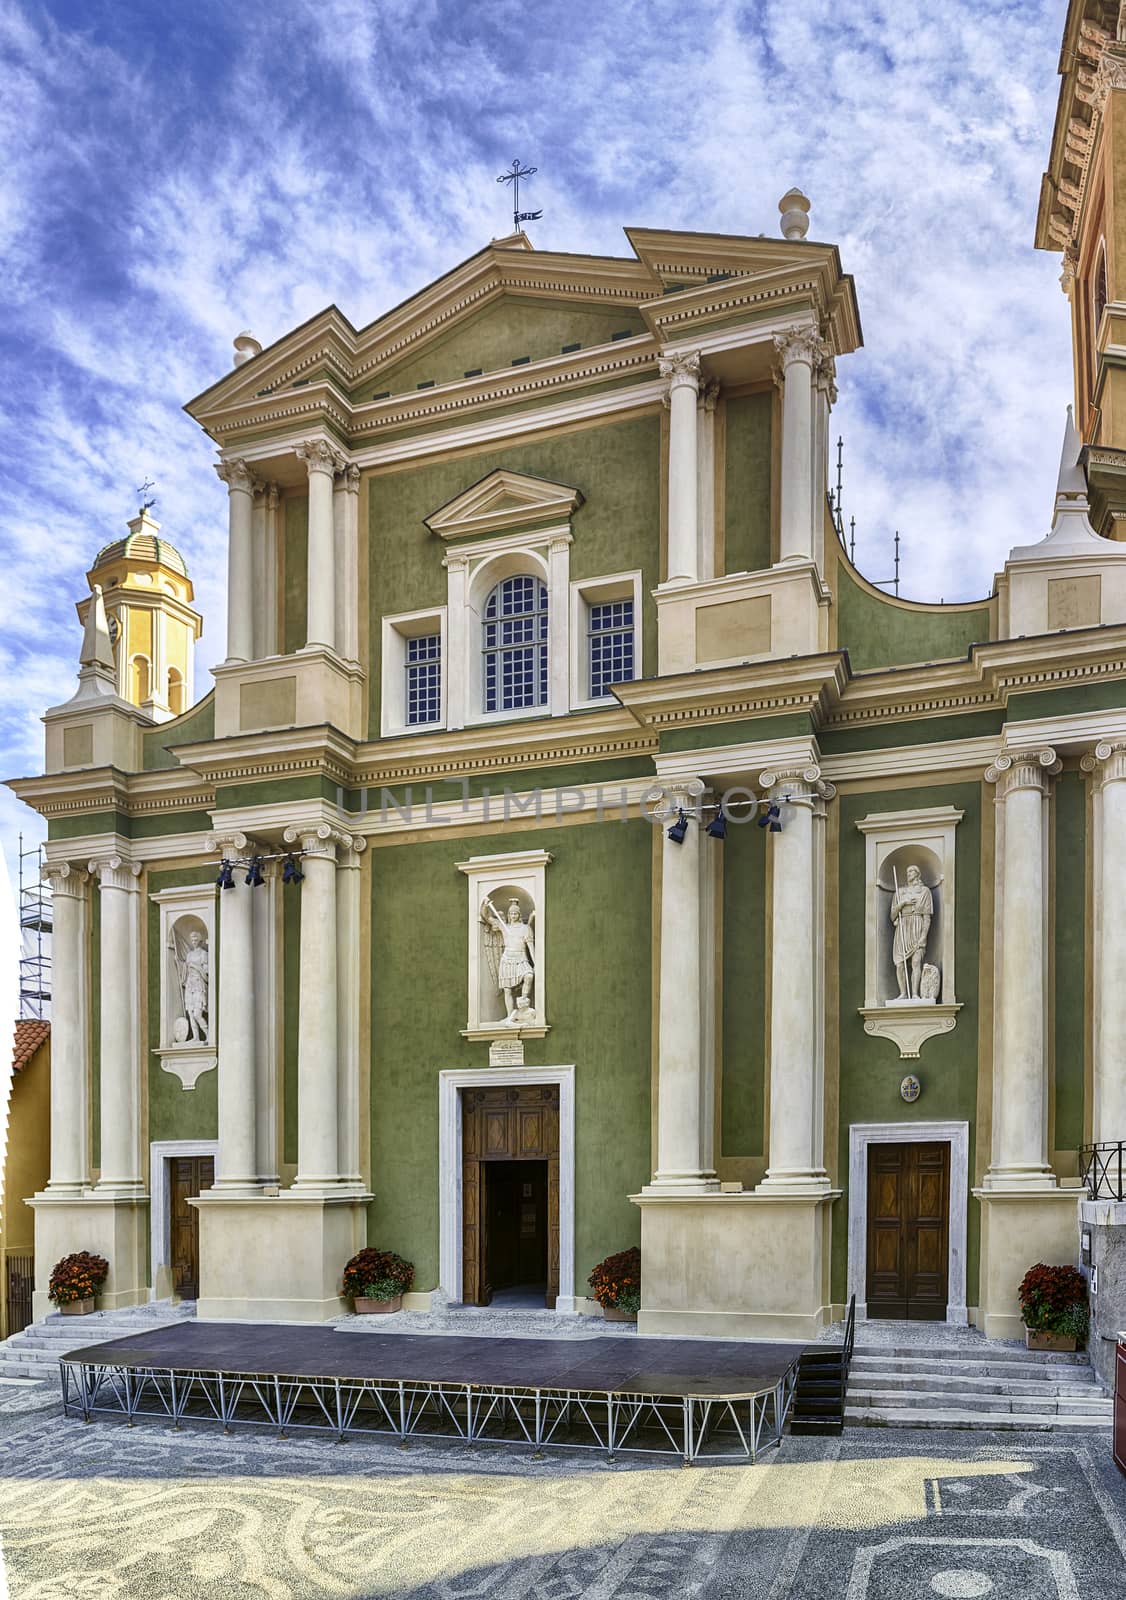 Facade of the Basilica of Saint-Michel-Archange in the old town of Menton, picturesque city in the Provence-Alpes-Cote d'Azur region on the French Riviera, close to the Italian border